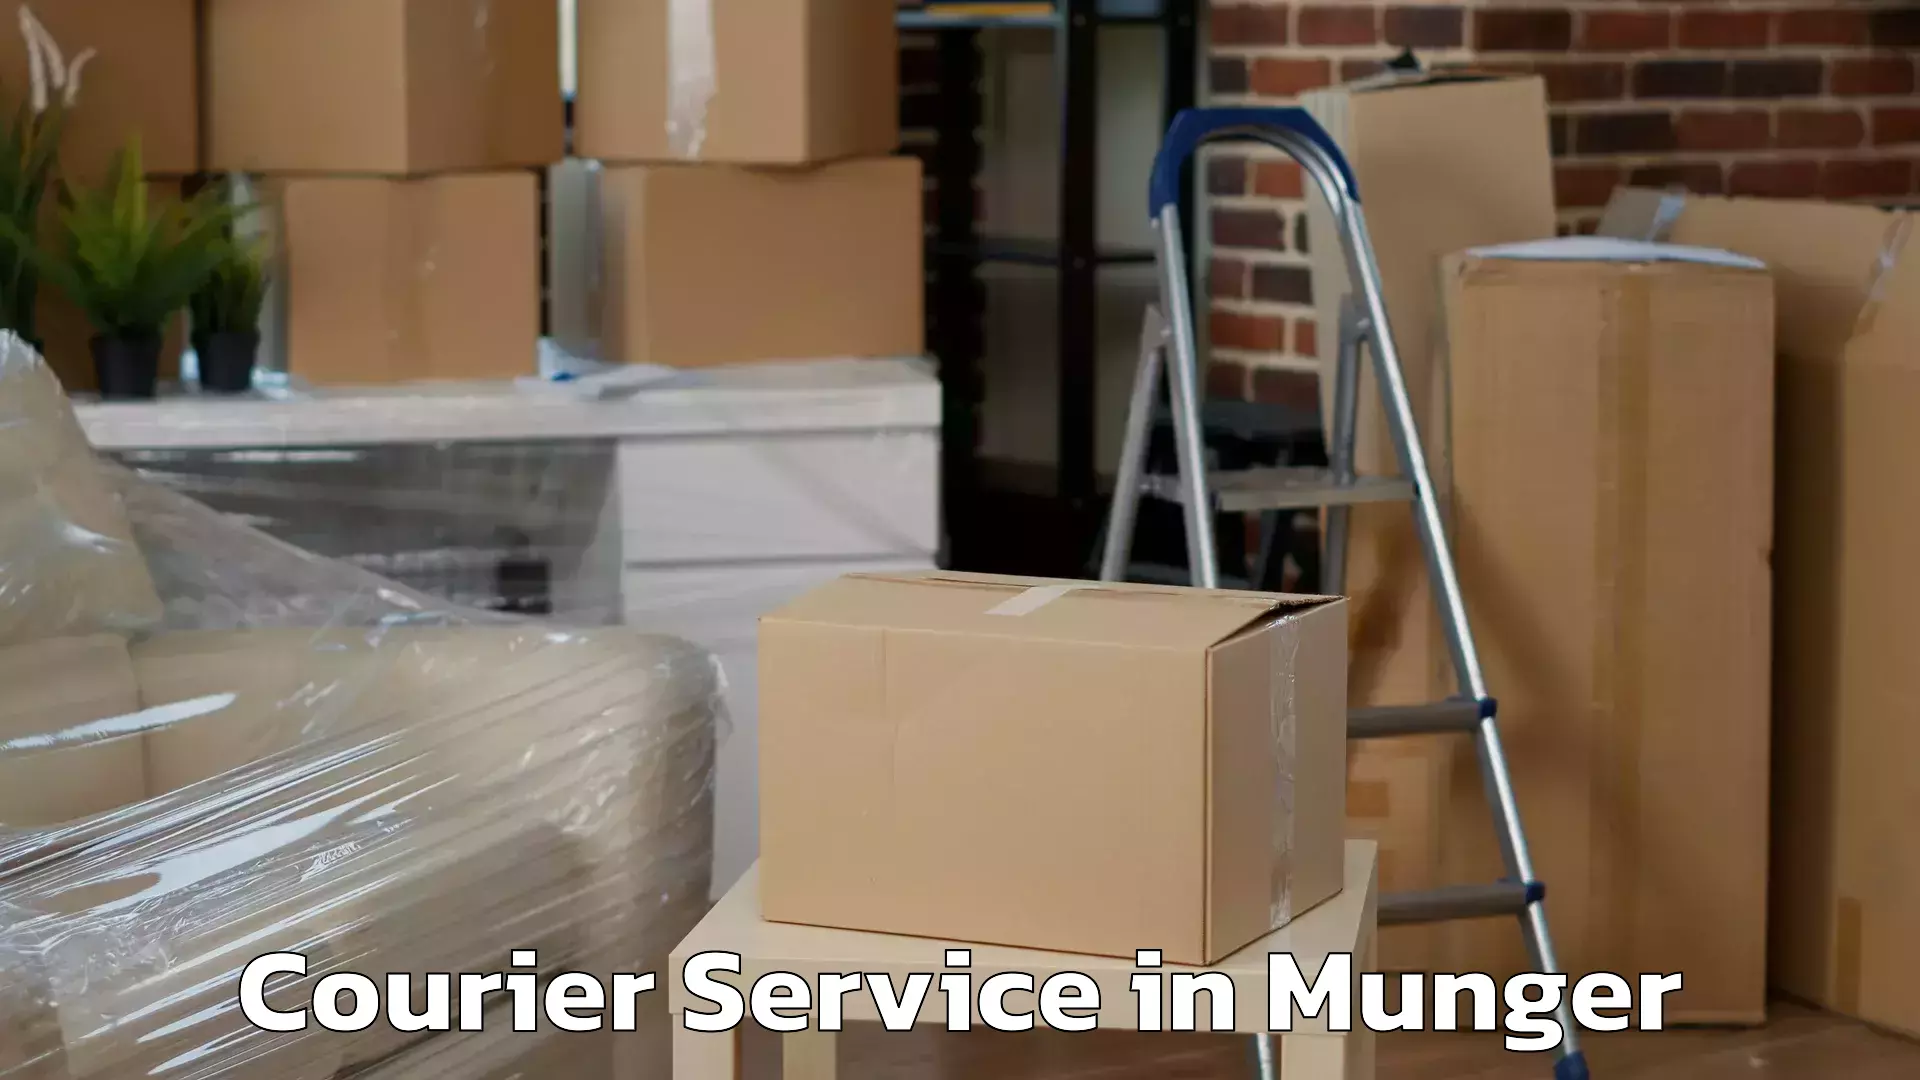 Courier insurance in Munger